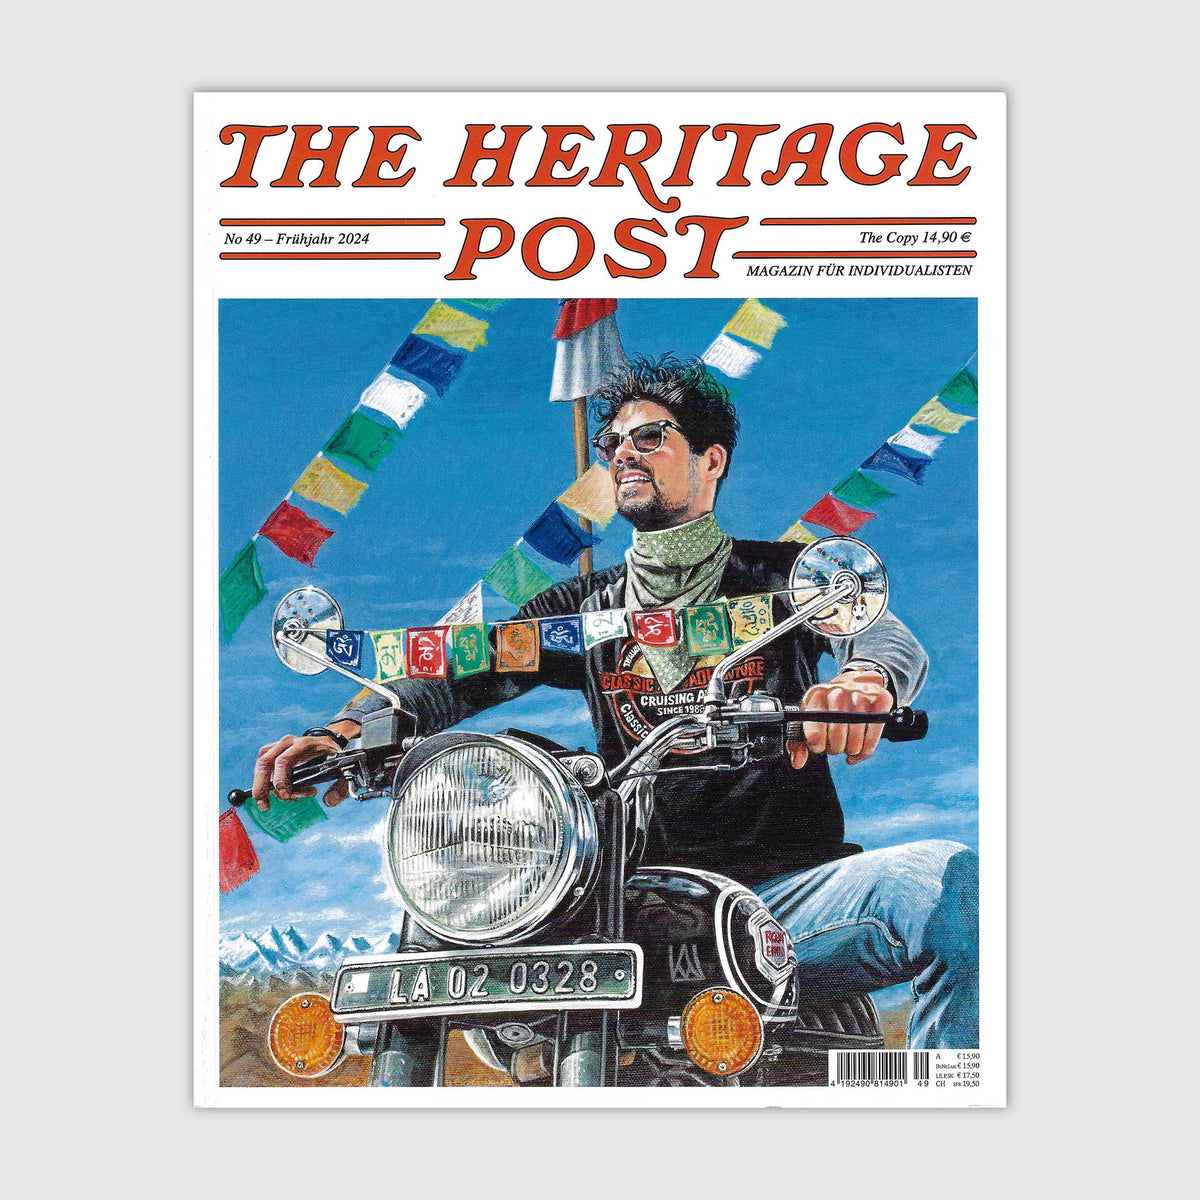 The Heritage Post No. 49